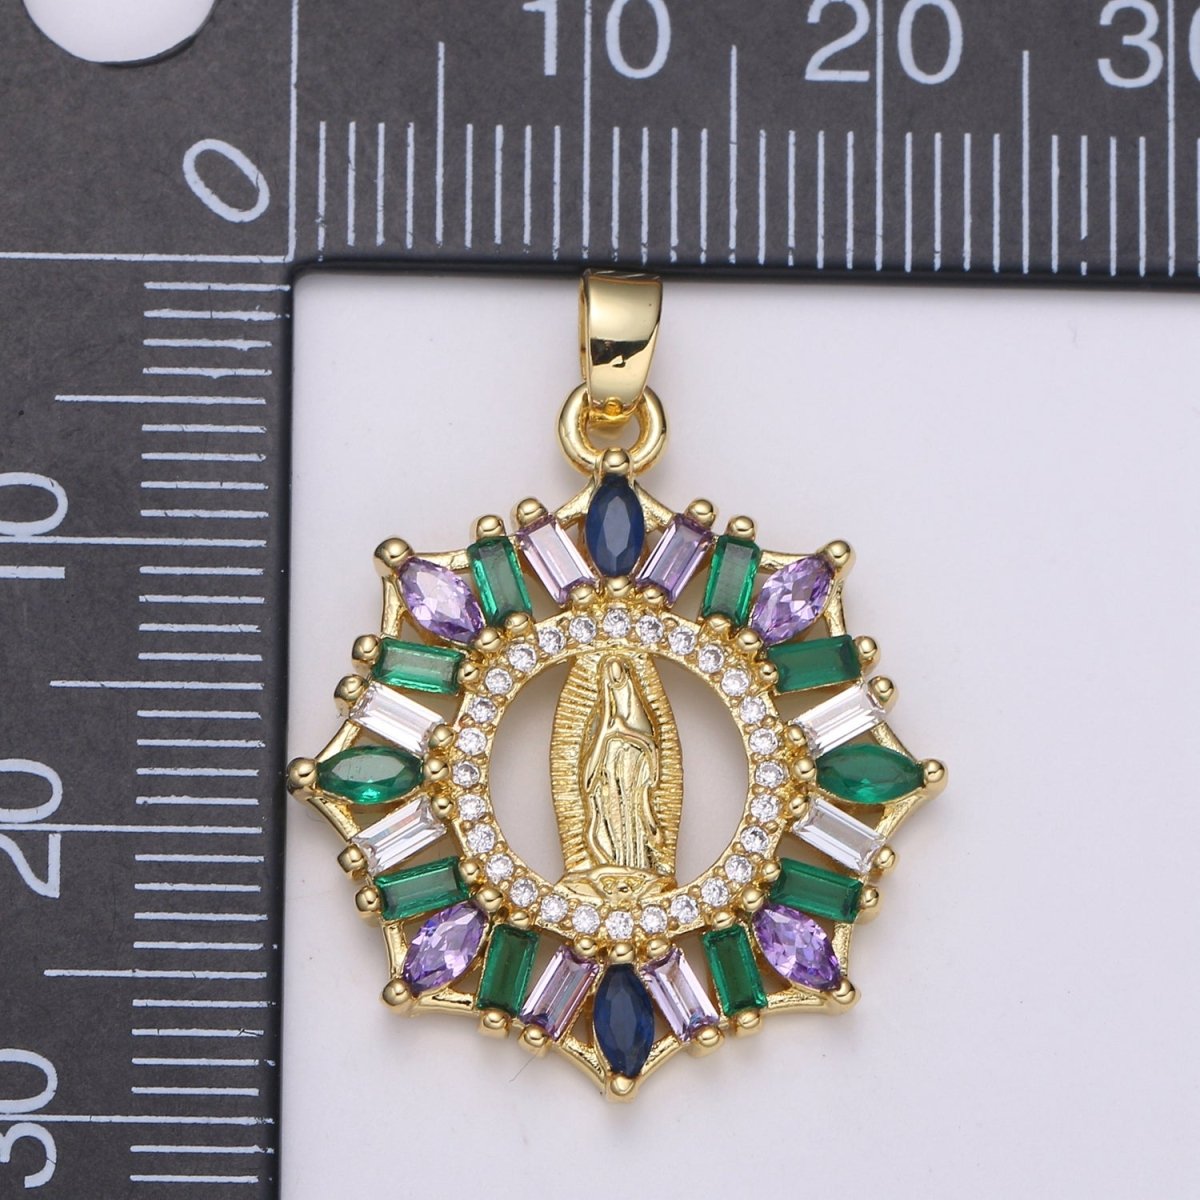 24K Gold Filled Virgin Mother Mary Pendant Micro Pave Baguette Lady of Guadalupe Medallion Necklace Charm for Religious Jewelry J-262 - DLUXCA